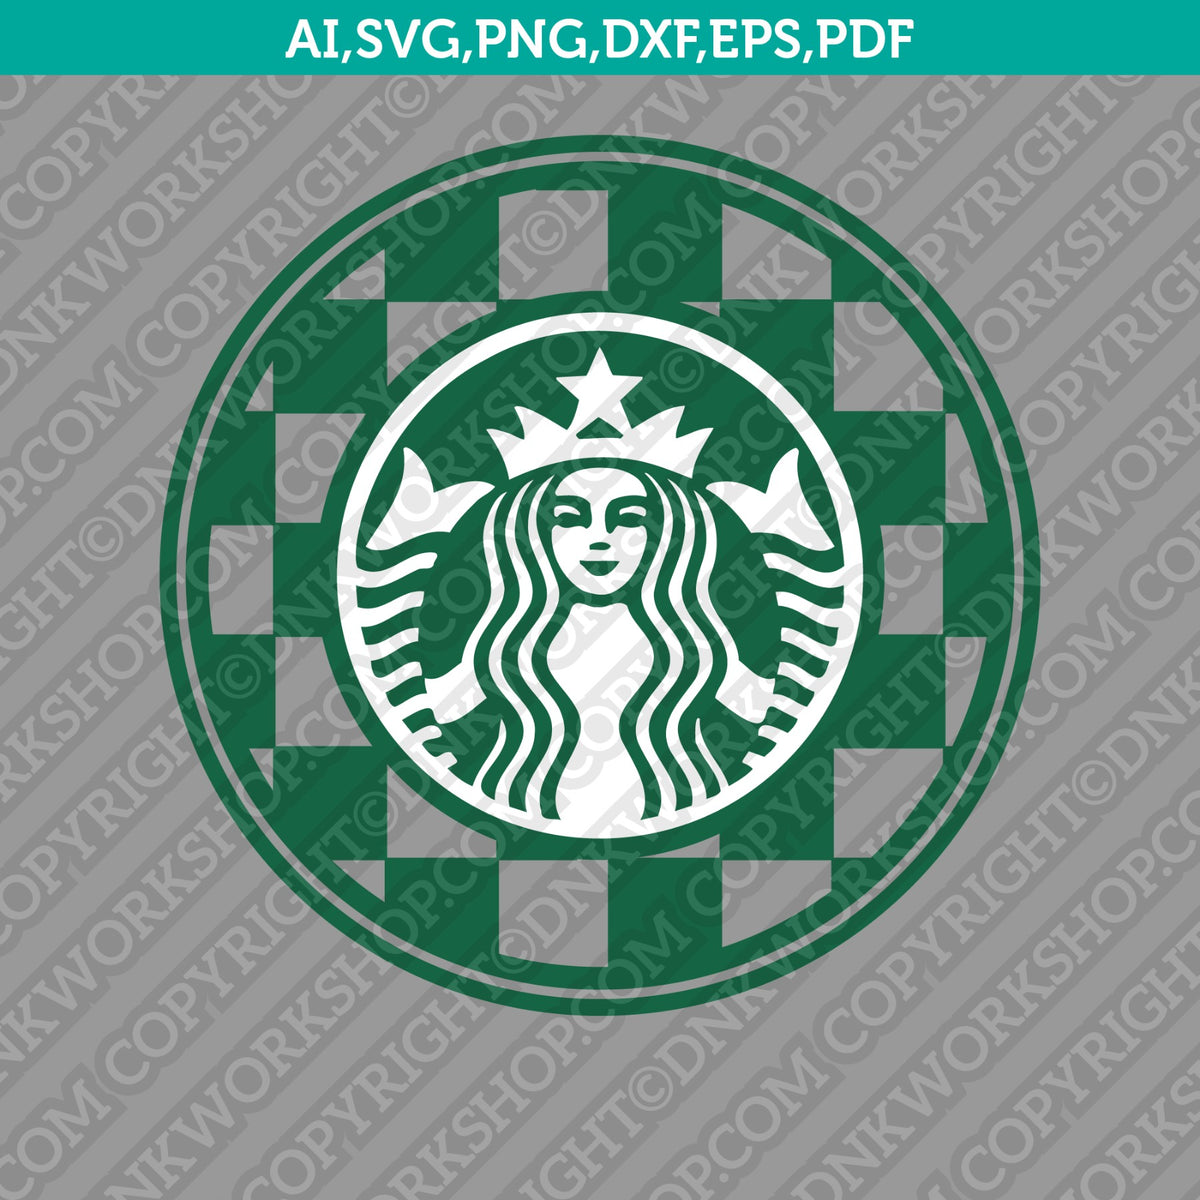 Louis Vuitton Svg File For Starbucks Cup